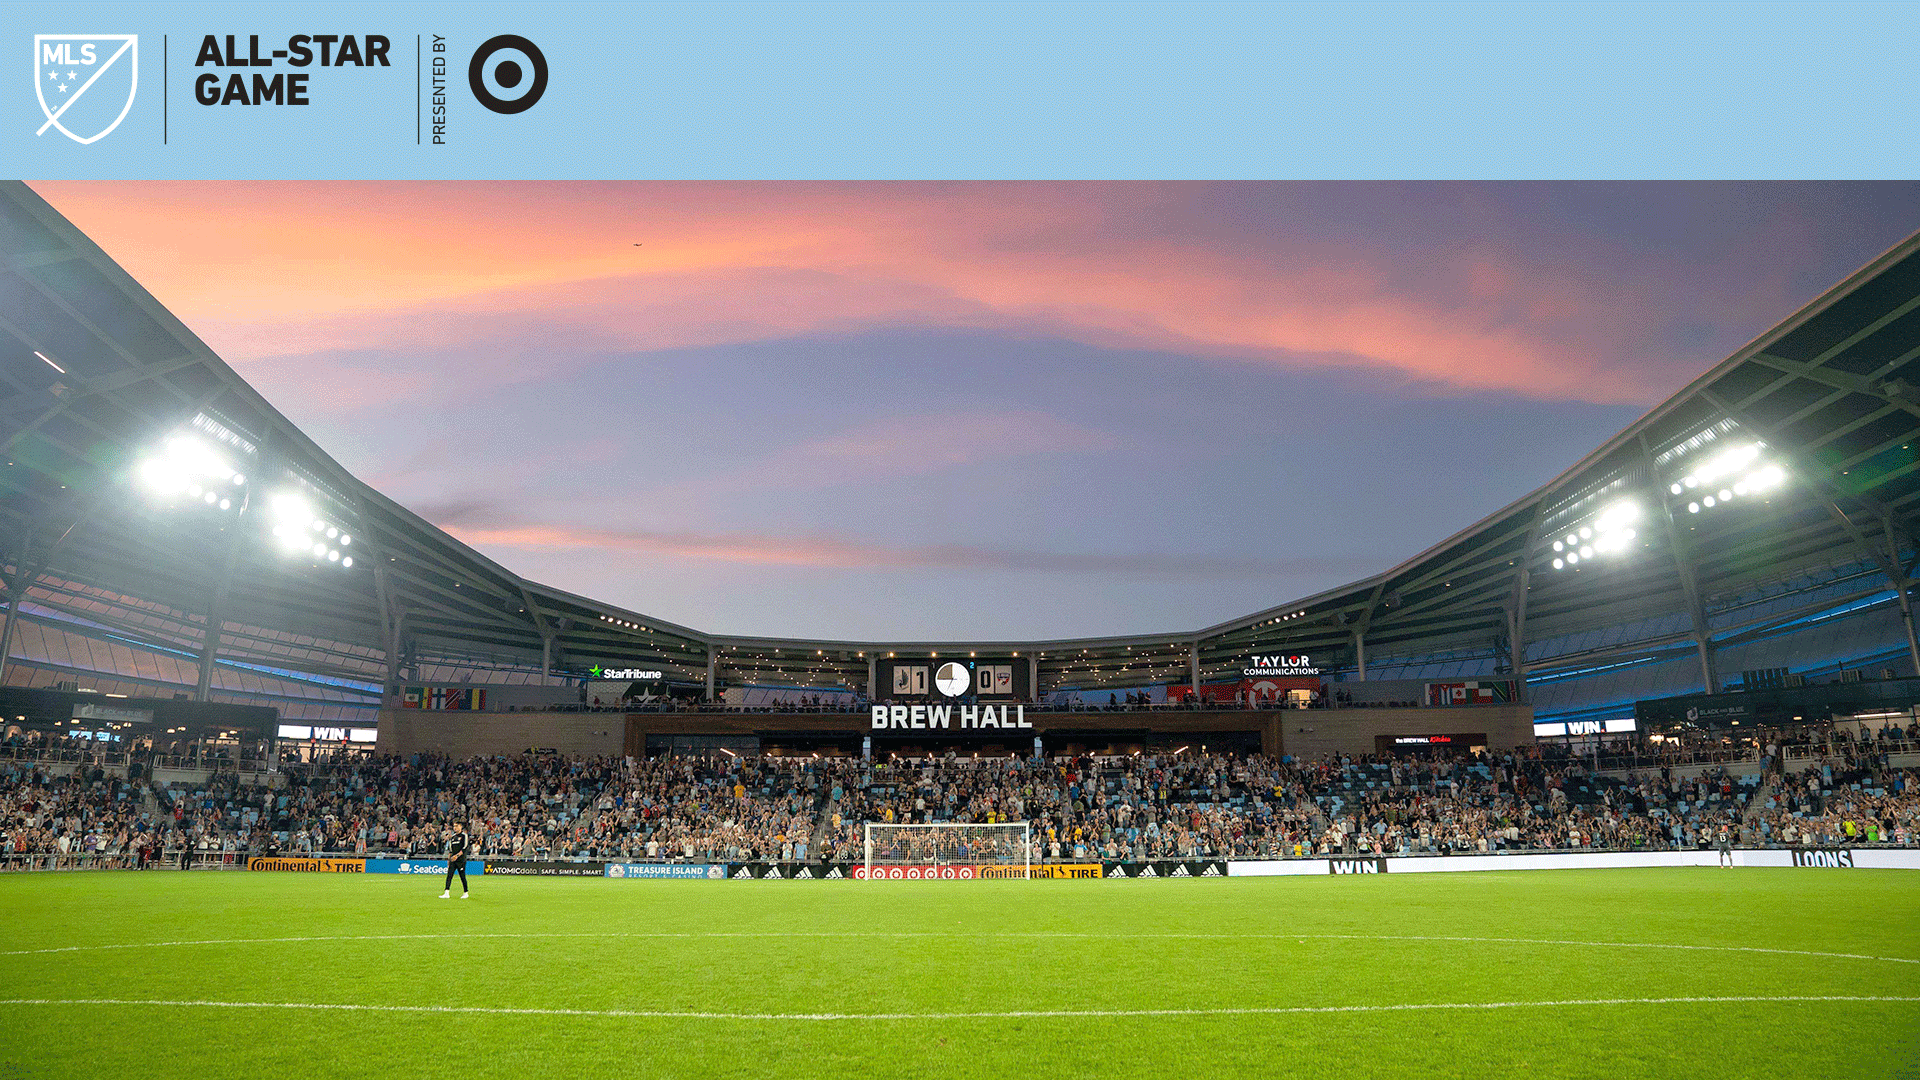 Minnesota to host 2022 MLS All-Star Game presented by Target